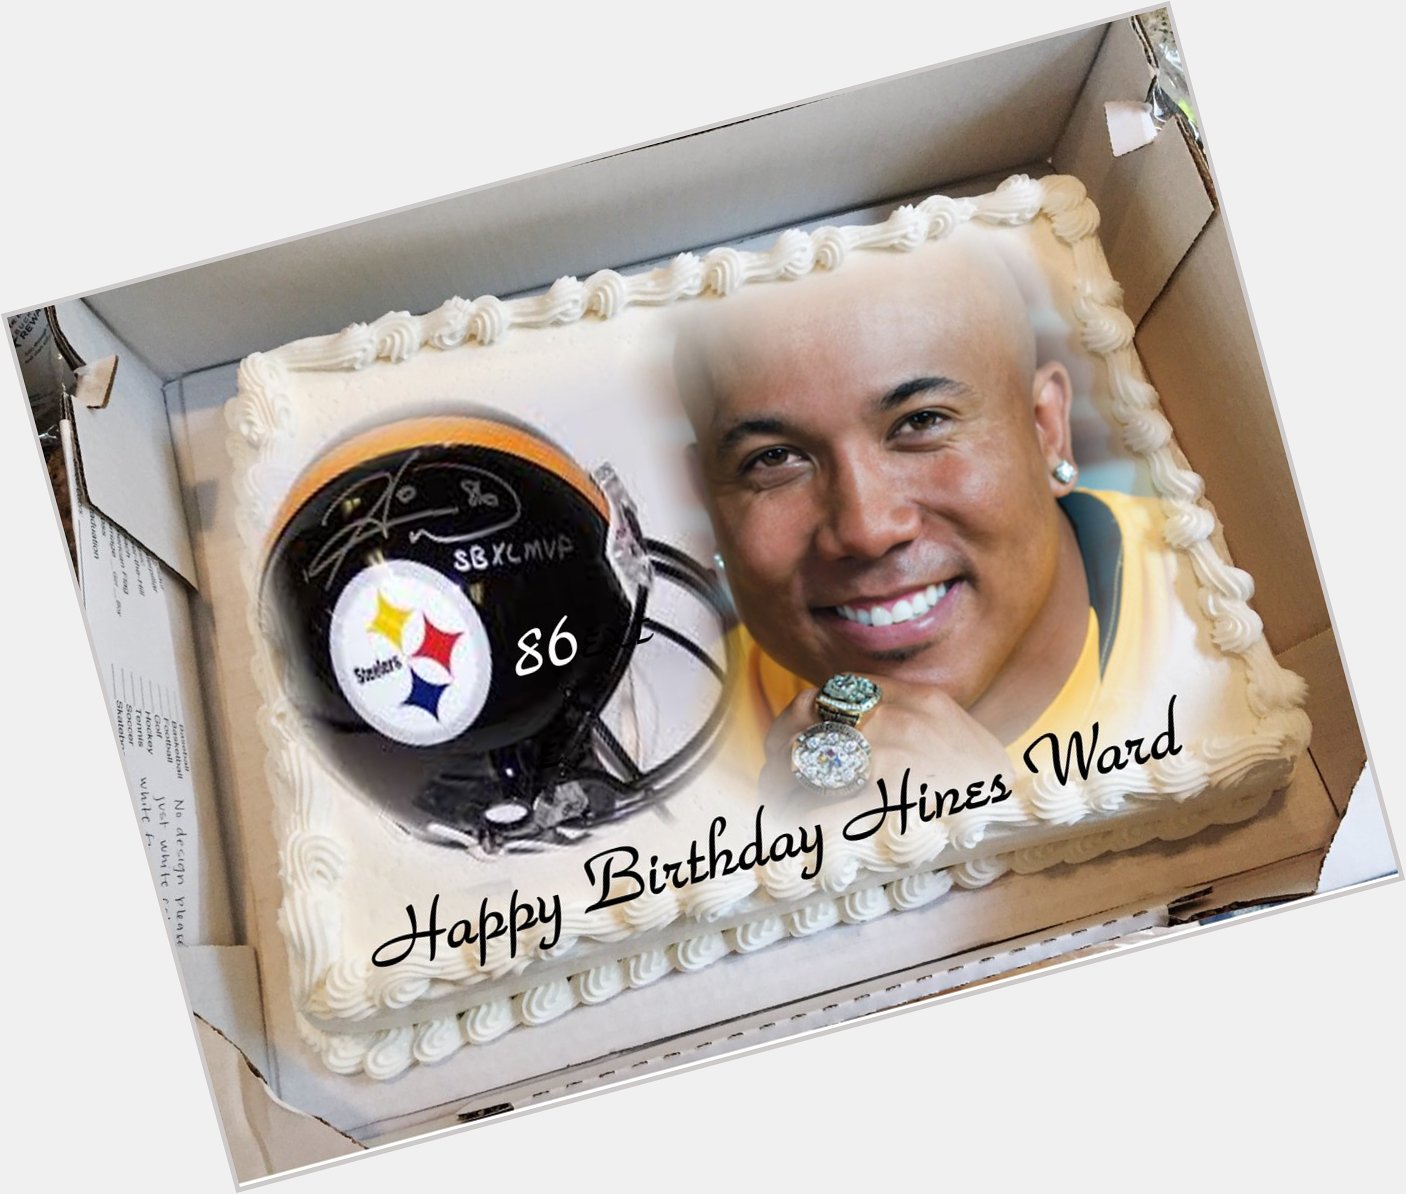 HAPPY BIRTHDAY TO THE AWESOME HINES WARD THE MAN THAT NEVER STOPS SMILING...LADY STEEL 